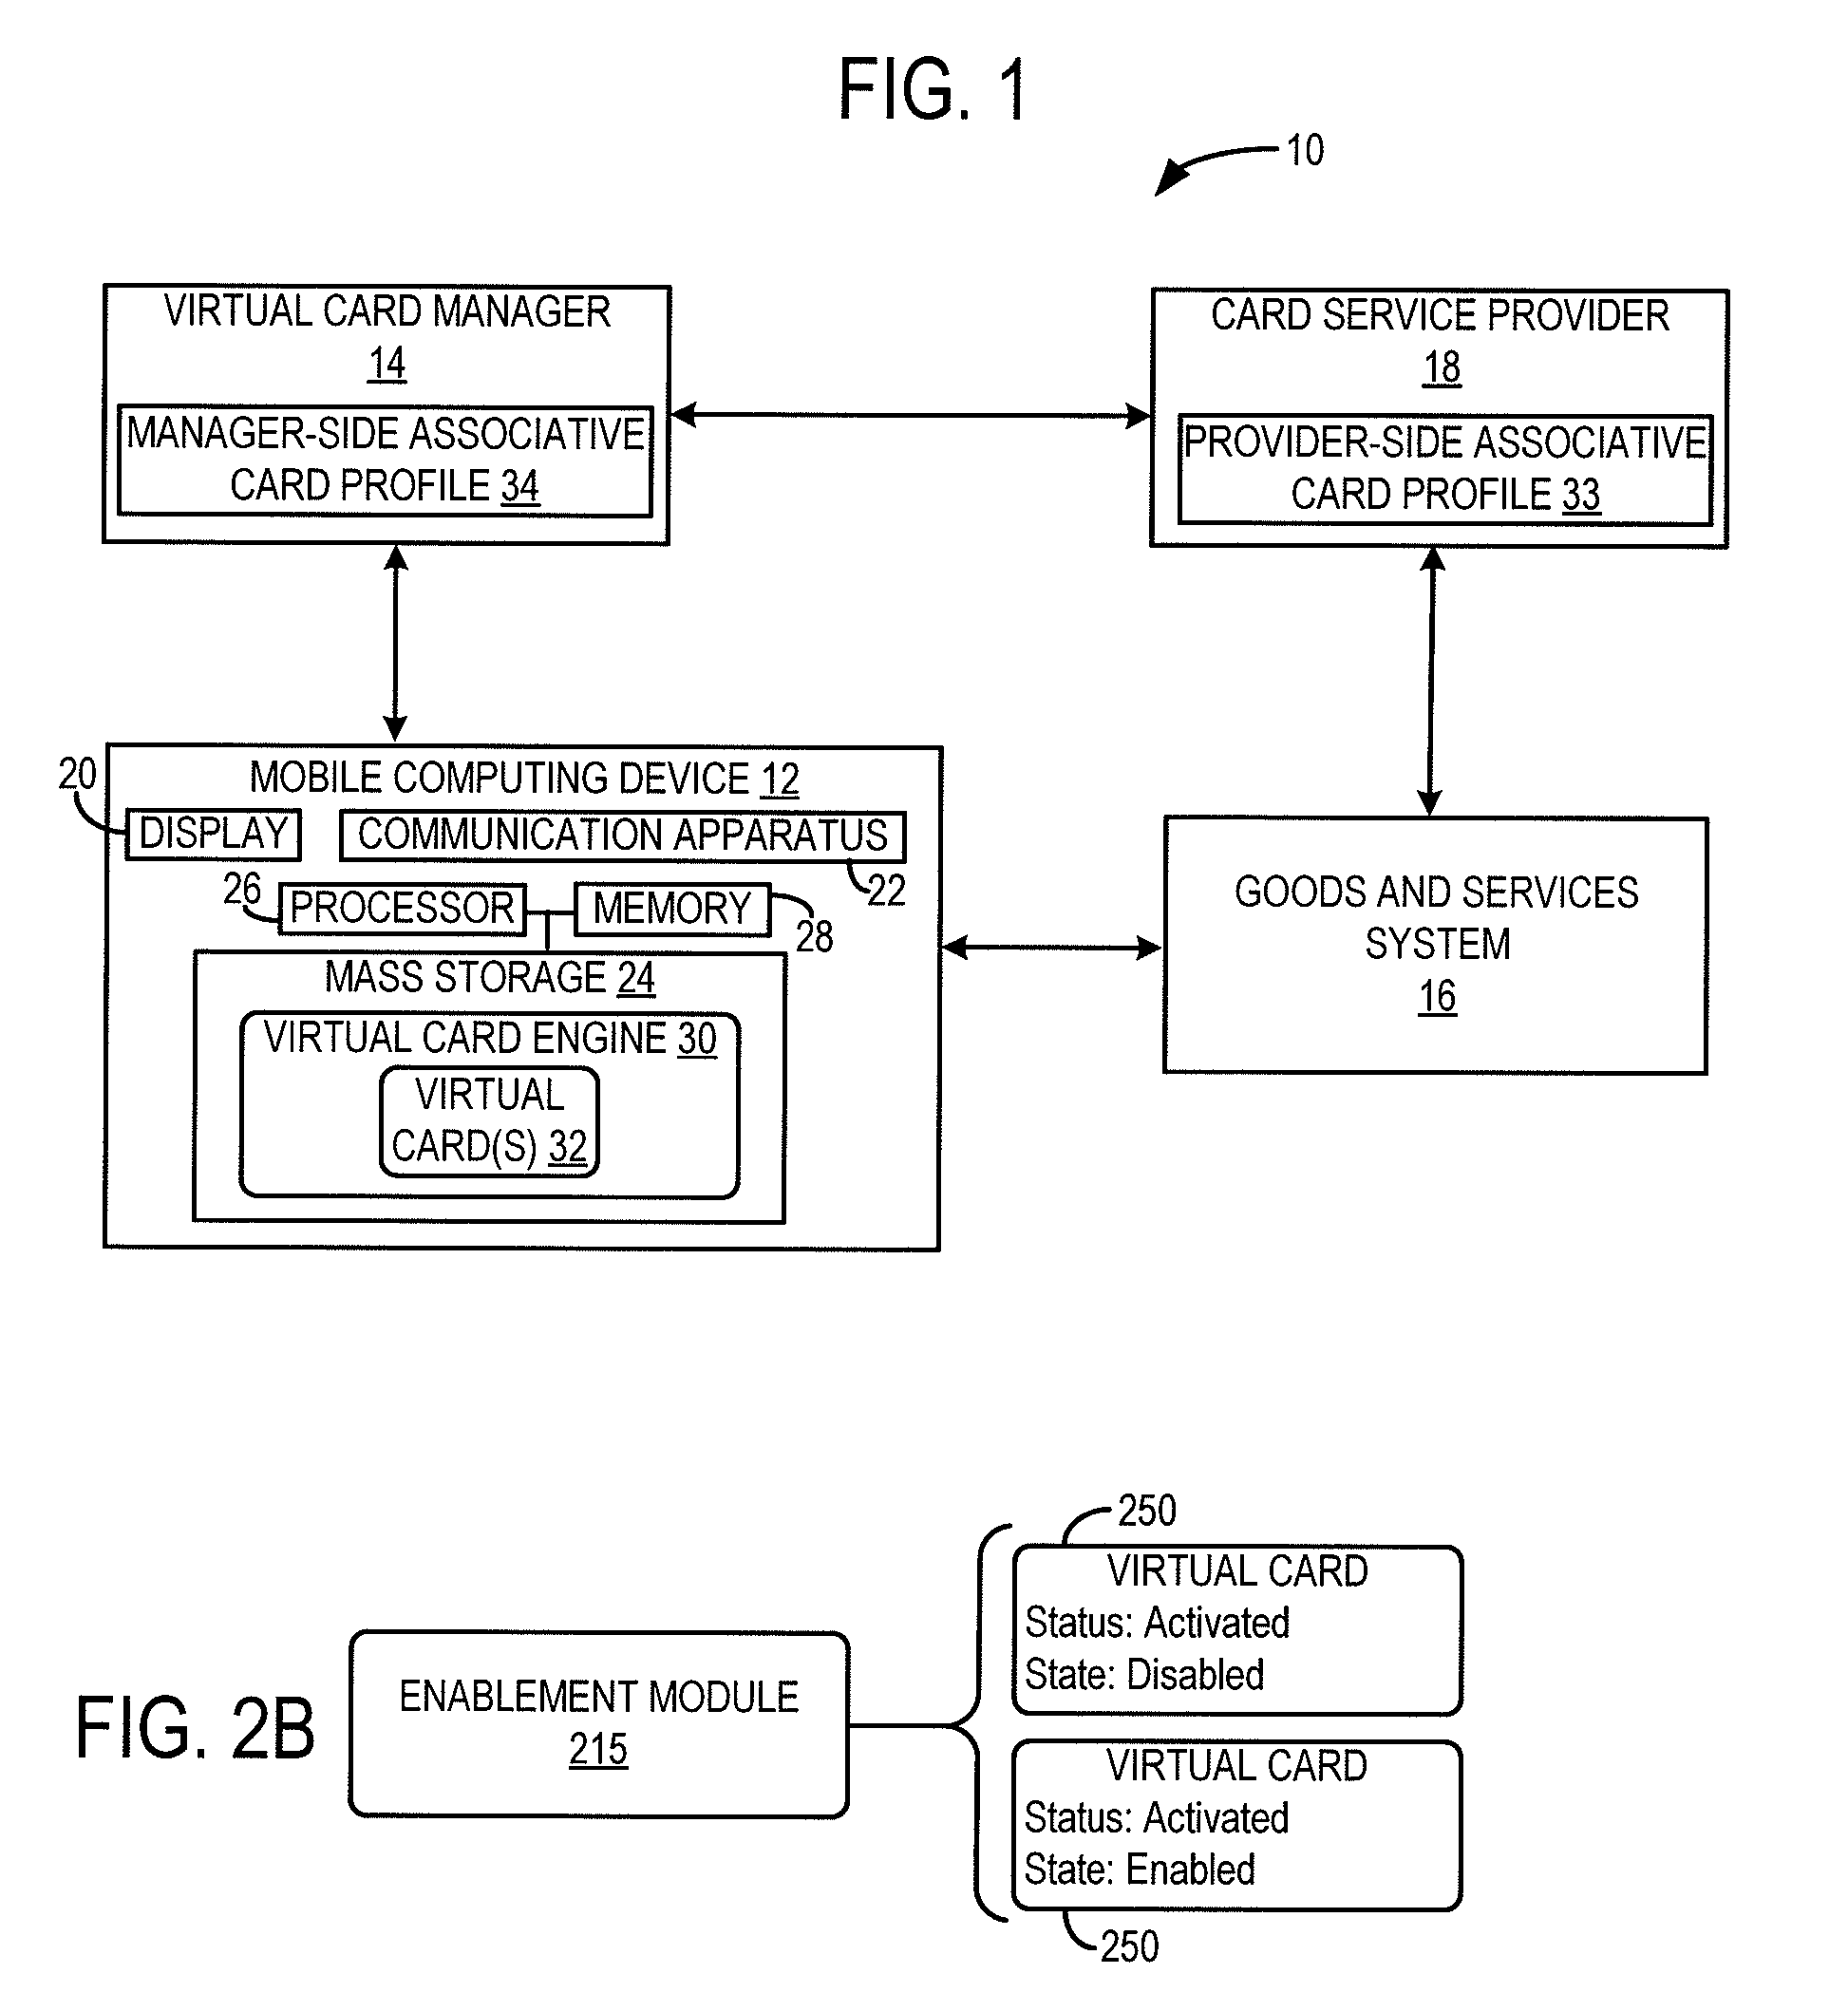 Systems and methods for authentication of a virtual stored value card